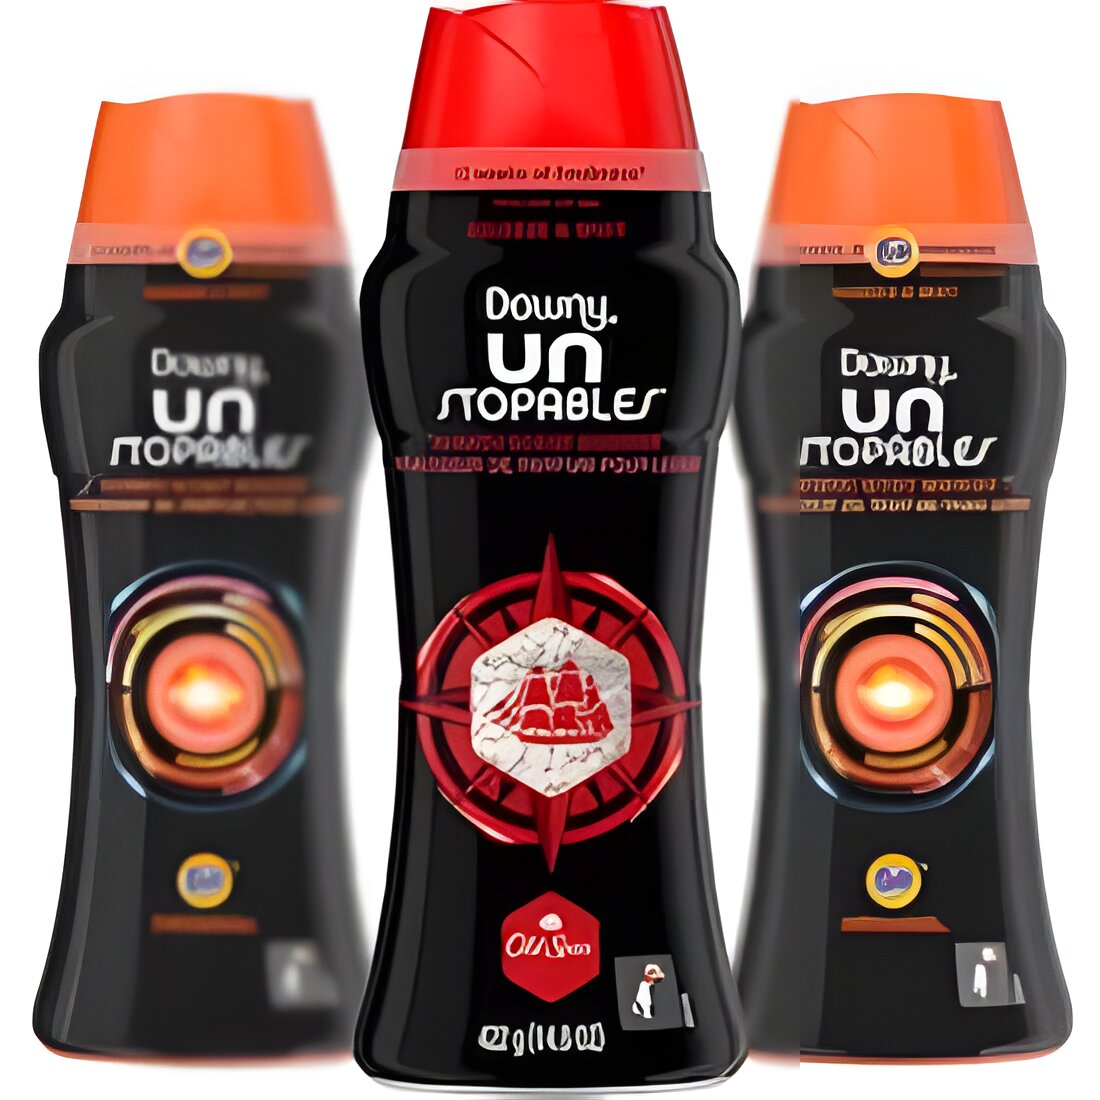 Free Downy Unstopables Old Spice Samples